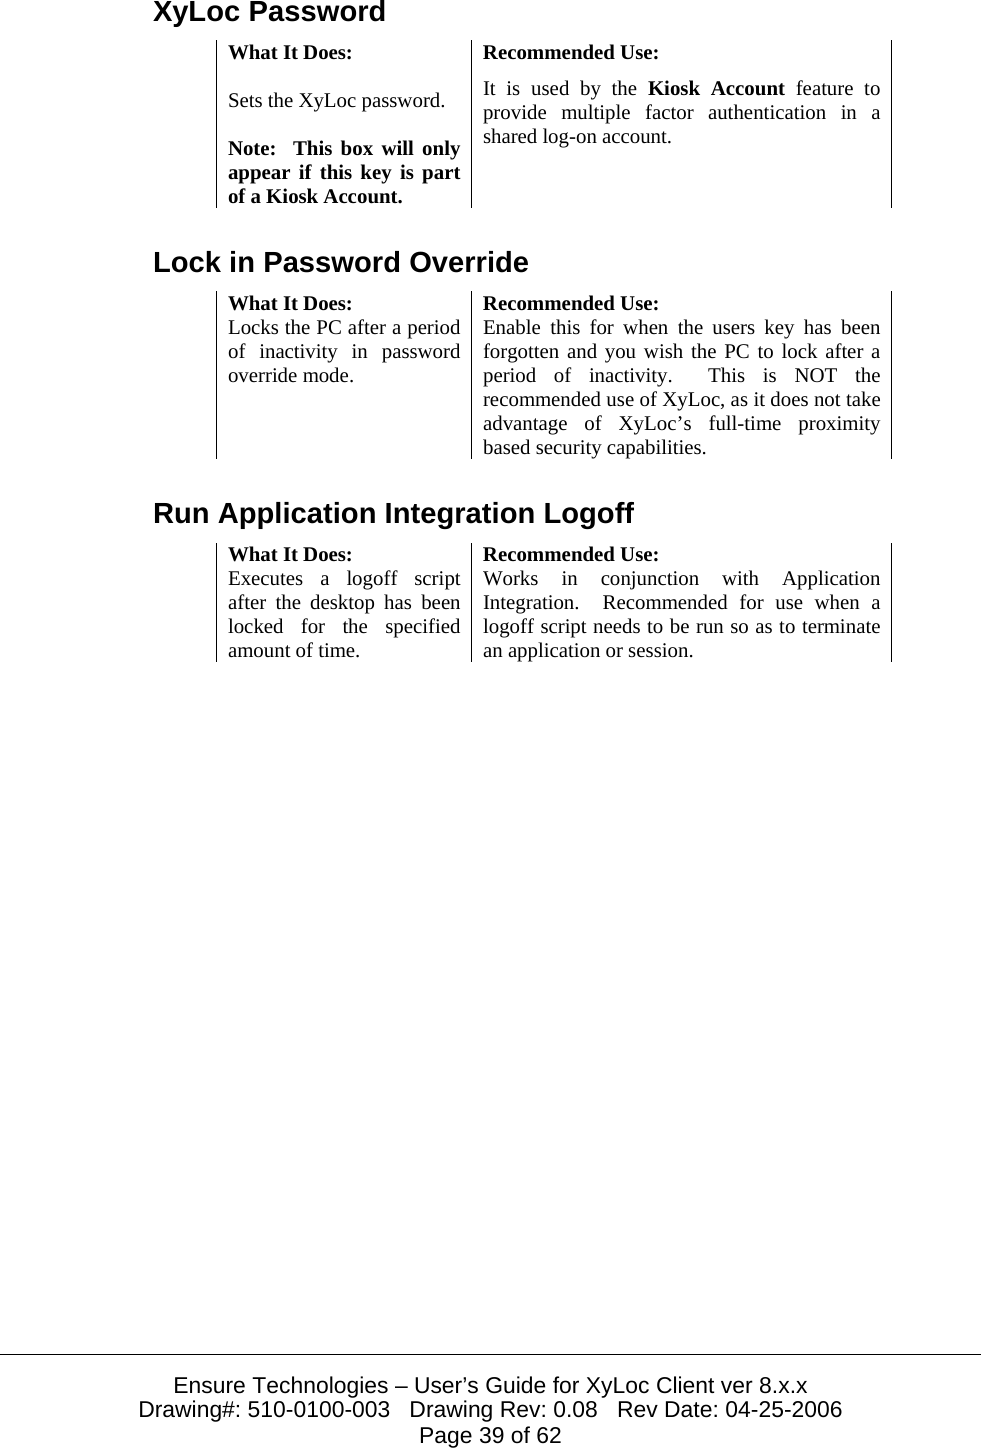  Ensure Technologies – User’s Guide for XyLoc Client ver 8.x.x Drawing#: 510-0100-003   Drawing Rev: 0.08   Rev Date: 04-25-2006 Page 39 of 62 XyLoc Password What It Does:  Recommended Use:  Sets the XyLoc password.  Note:  This box will only appear if this key is part of a Kiosk Account. It is used by the Kiosk Account feature to provide multiple factor authentication in a shared log-on account.  Lock in Password Override What It Does:  Recommended Use: Locks the PC after a period of inactivity in password override mode.  Enable this for when the users key has been forgotten and you wish the PC to lock after a period of inactivity.  This is NOT the recommended use of XyLoc, as it does not take advantage of XyLoc’s full-time proximity based security capabilities. Run Application Integration Logoff What It Does:  Recommended Use: Executes a logoff script after the desktop has been locked for the specified amount of time. Works in conjunction with Application Integration.  Recommended for use when a logoff script needs to be run so as to terminate an application or session. 